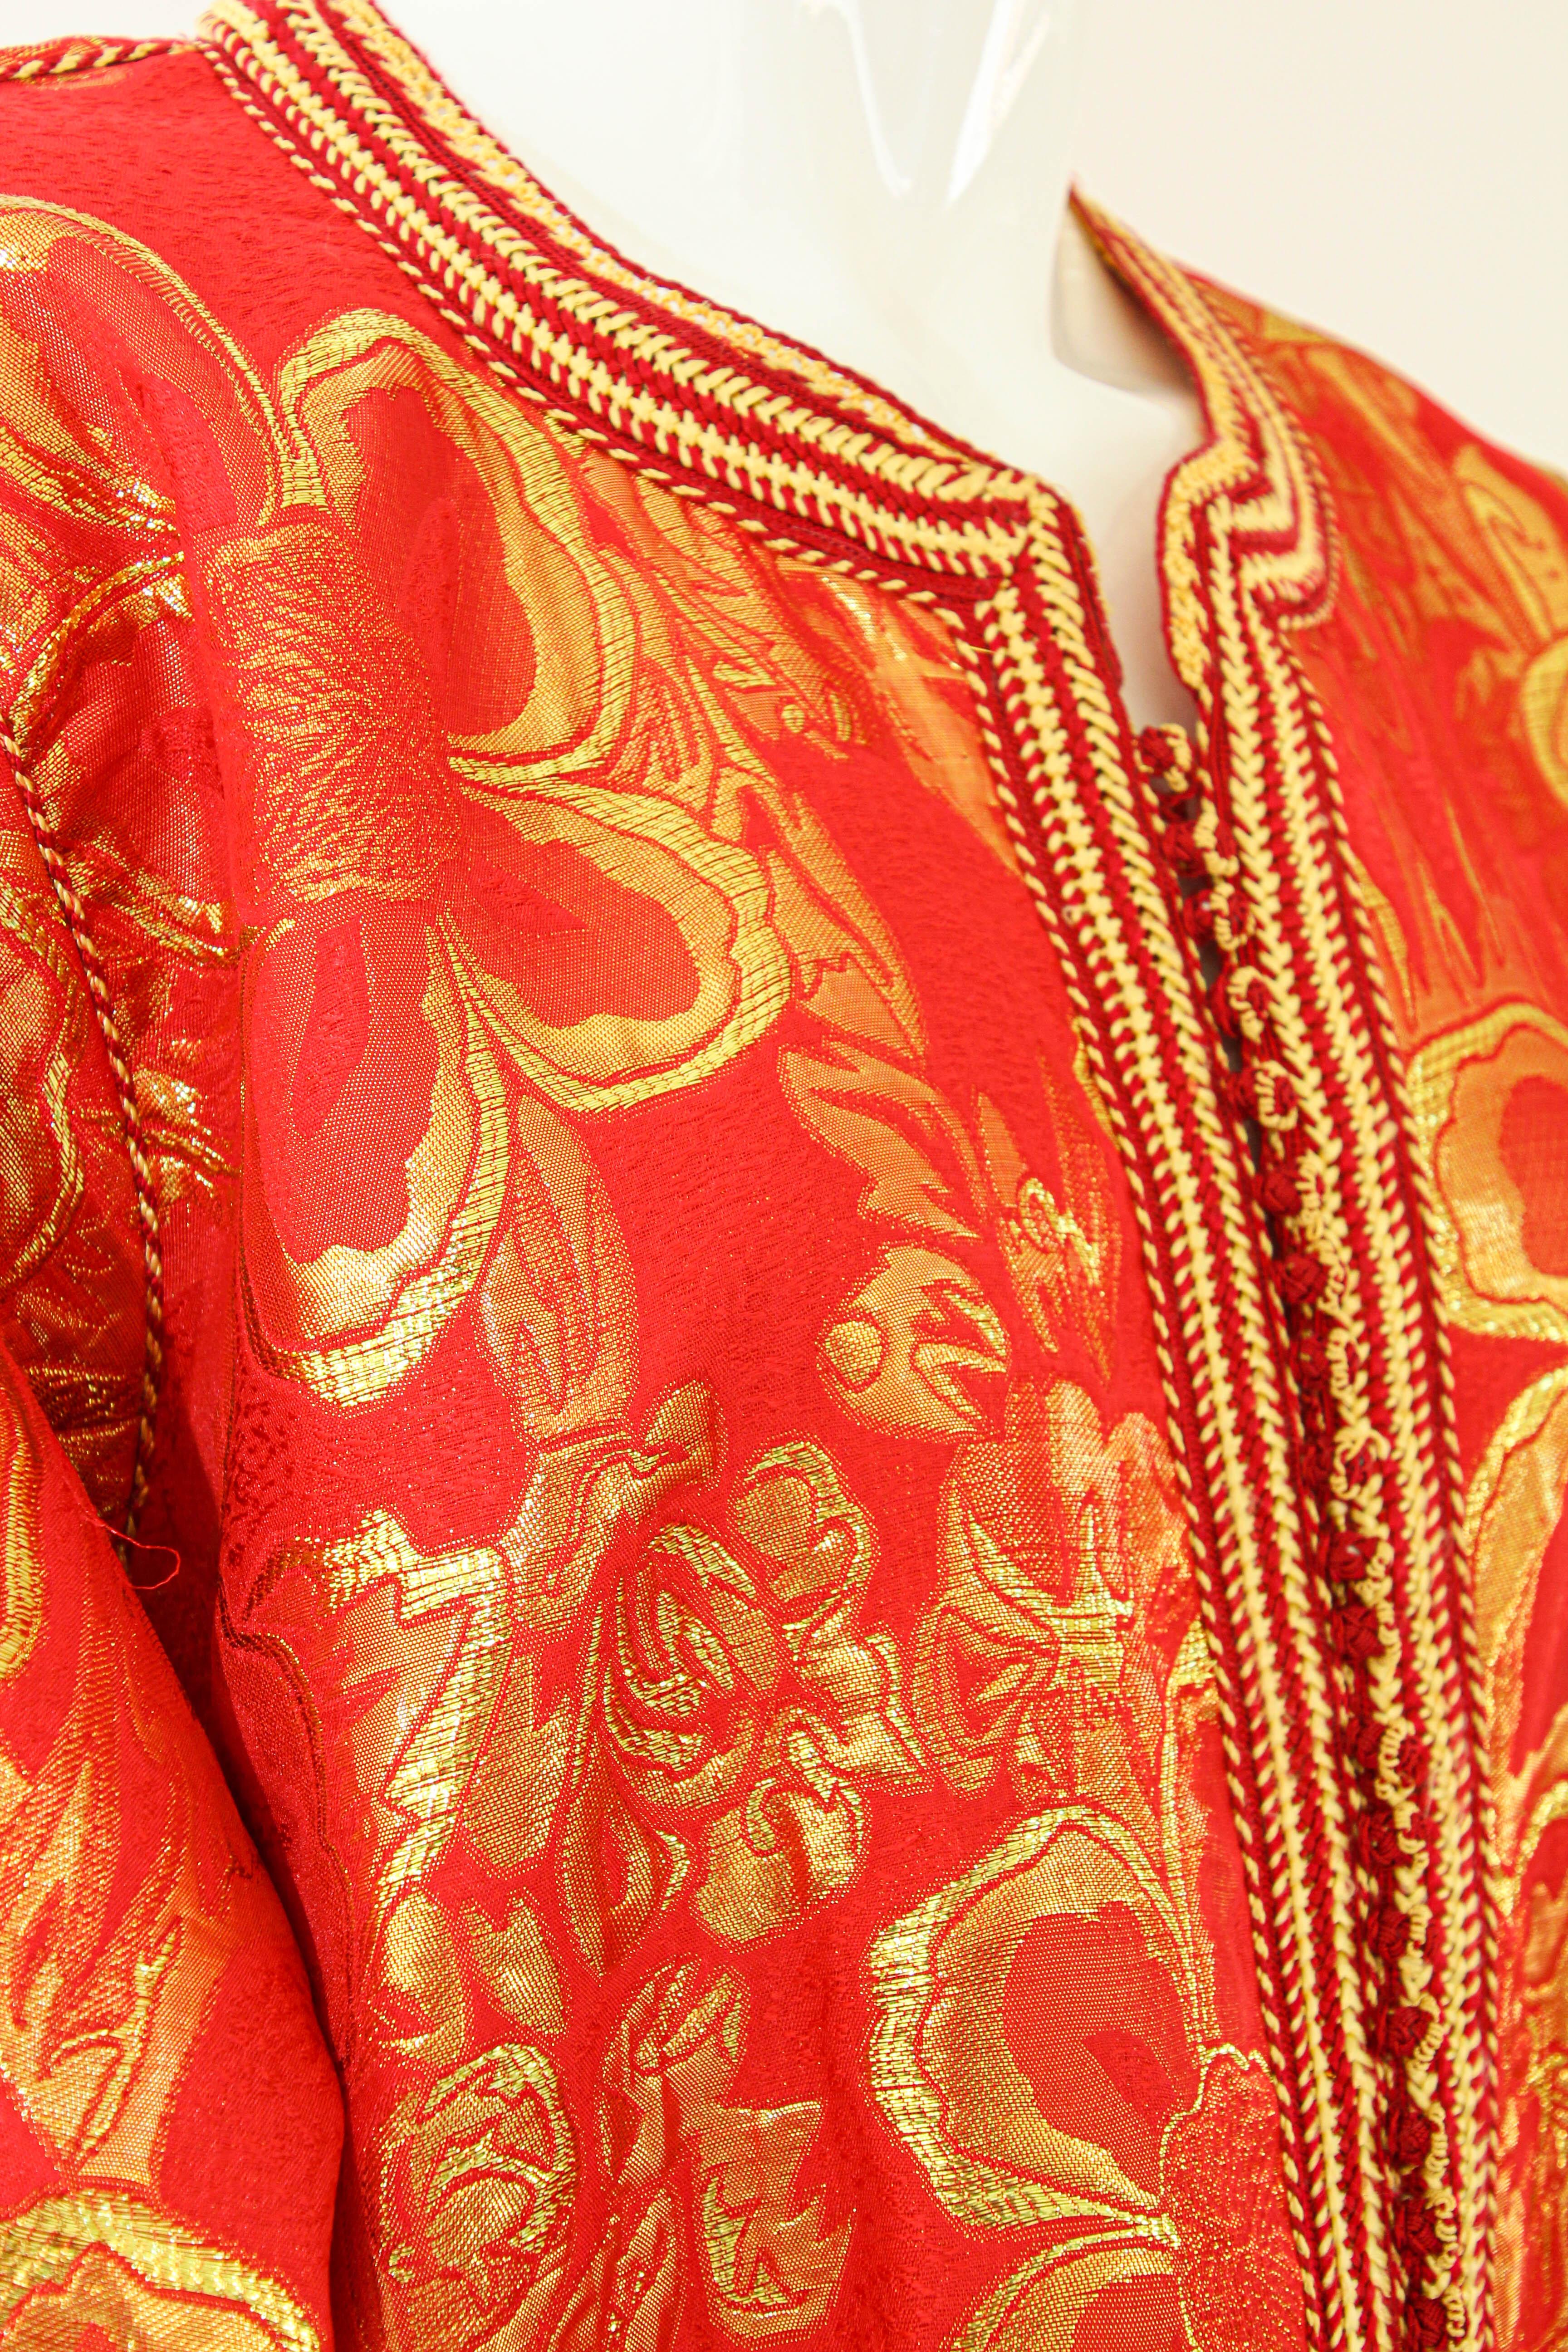 1970s Vintage Moroccan Kaftan Red and Gold Brocade Caftan Maxi Dress For Sale 5